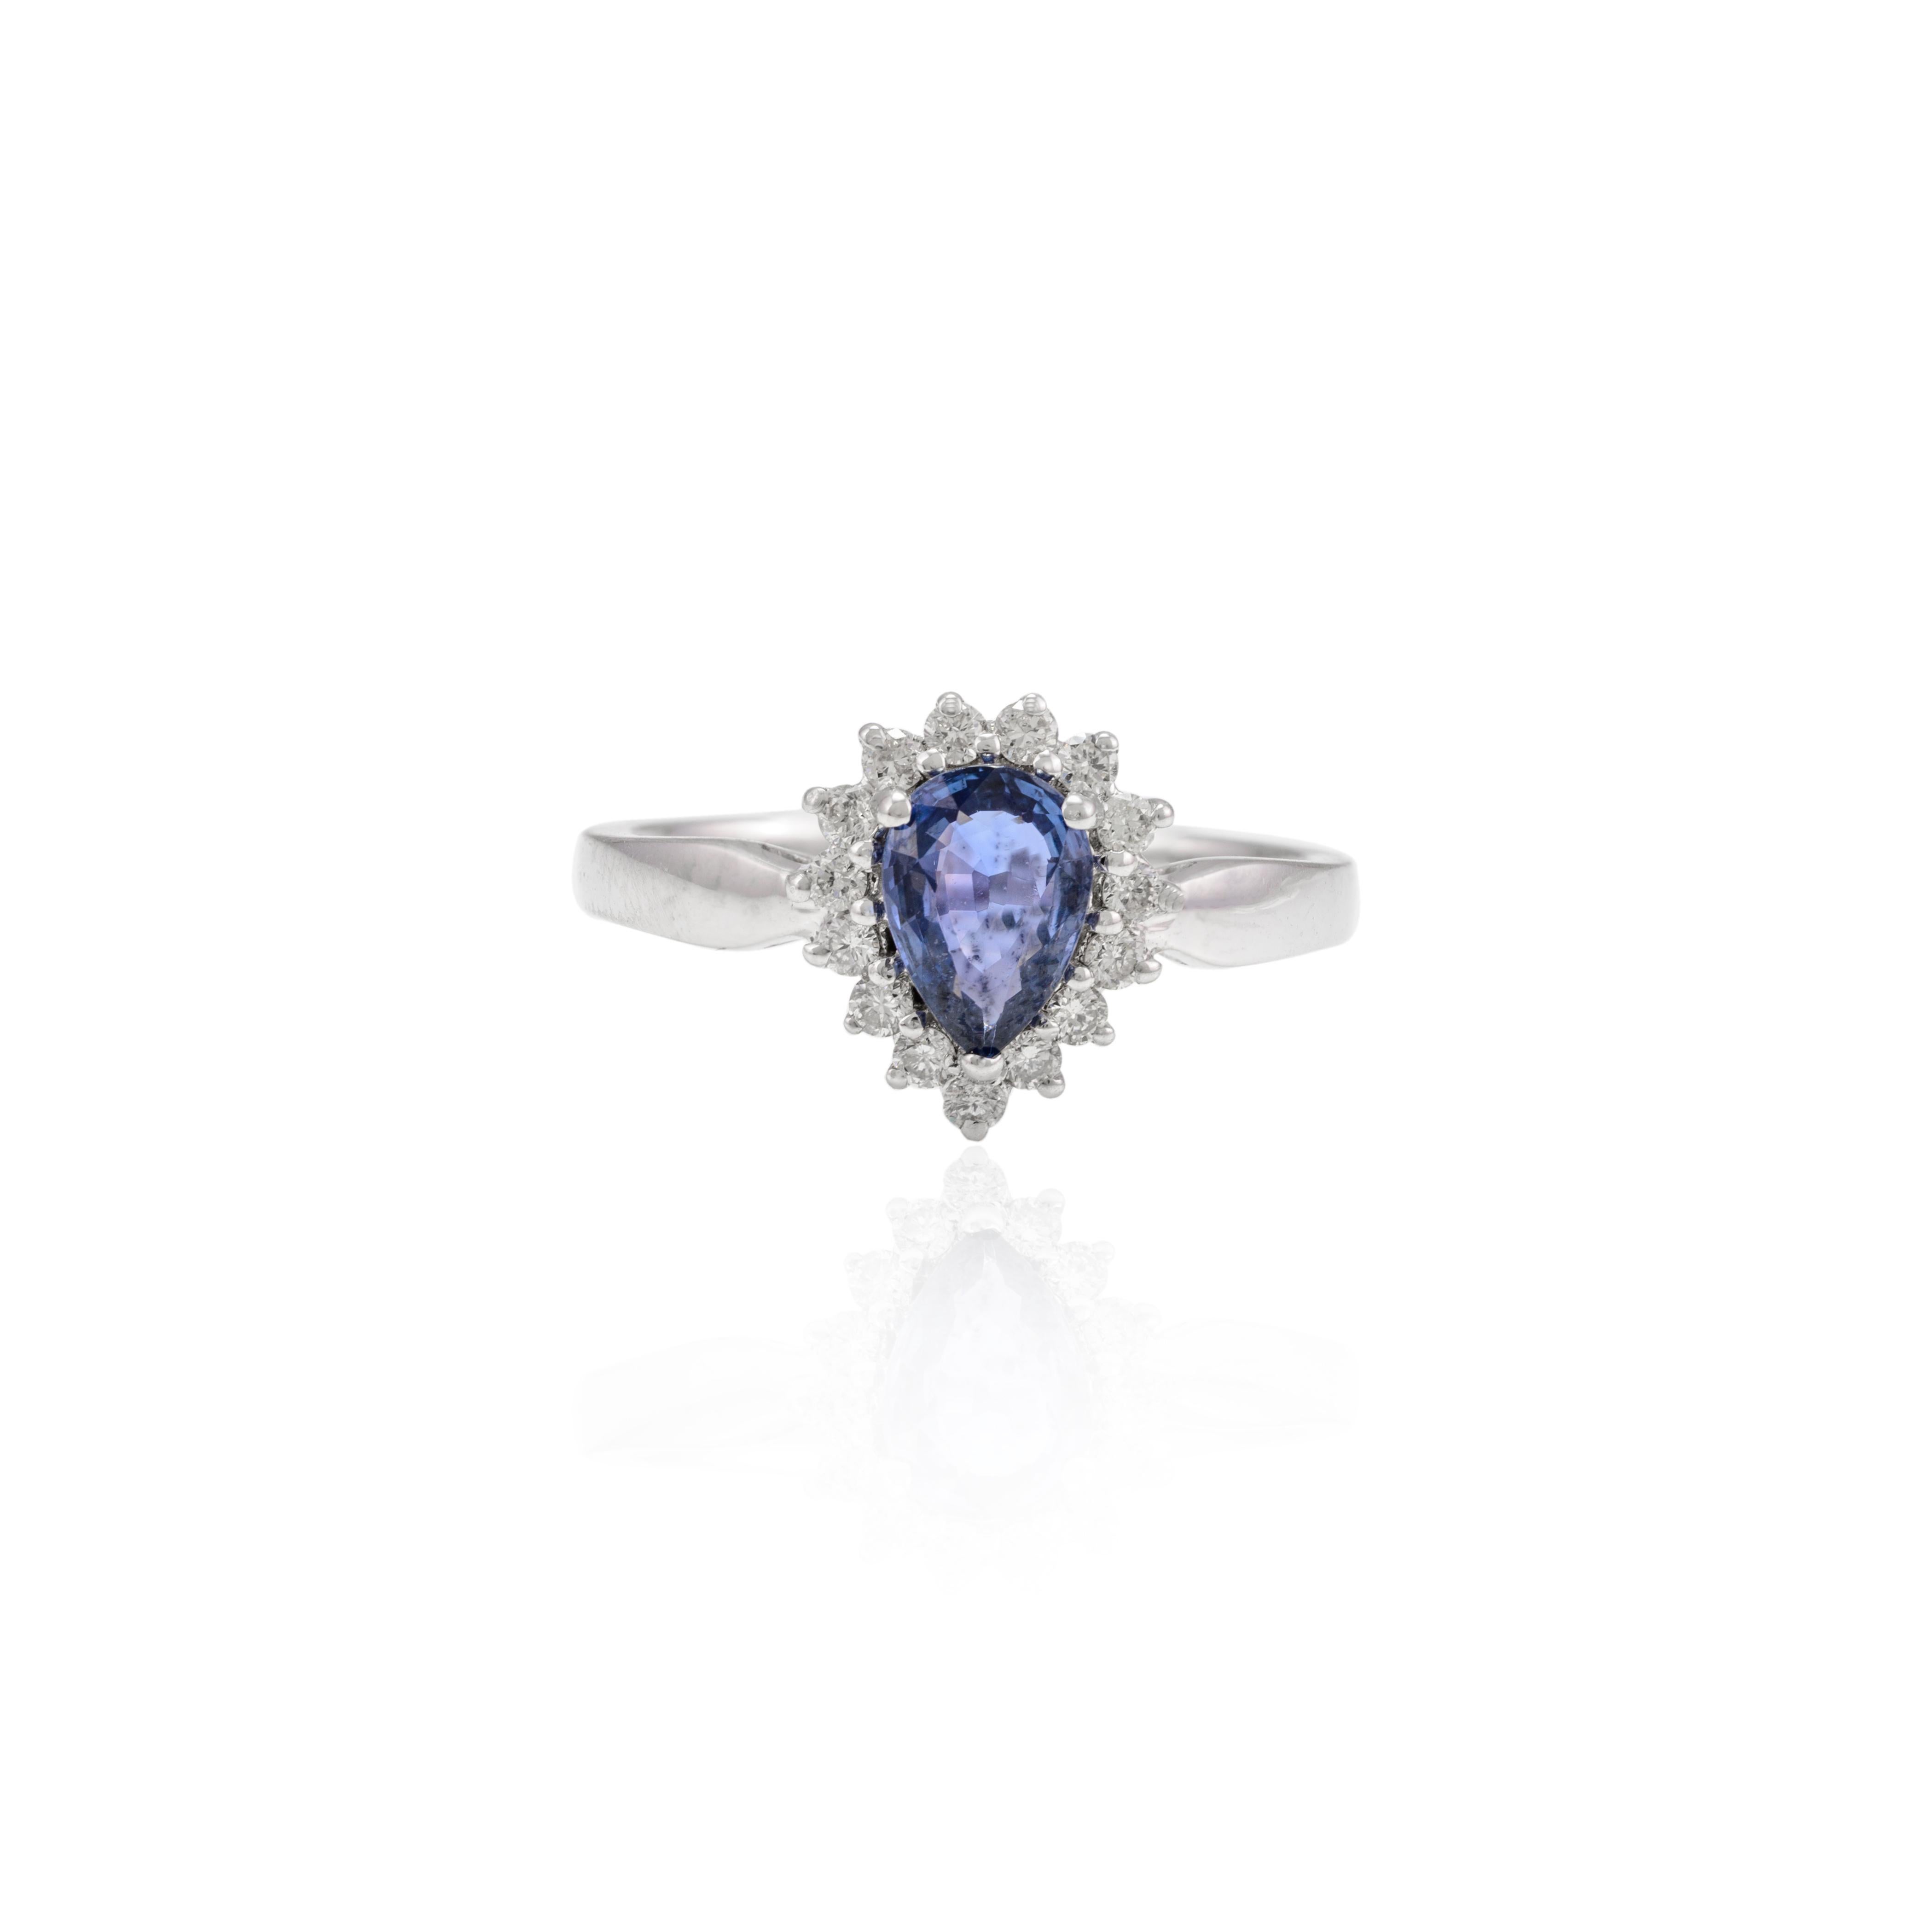 For Sale:  0.77 Carat Pear Cut Blue Sapphire and Diamond Halo Ring 14k Solid White Gold 7